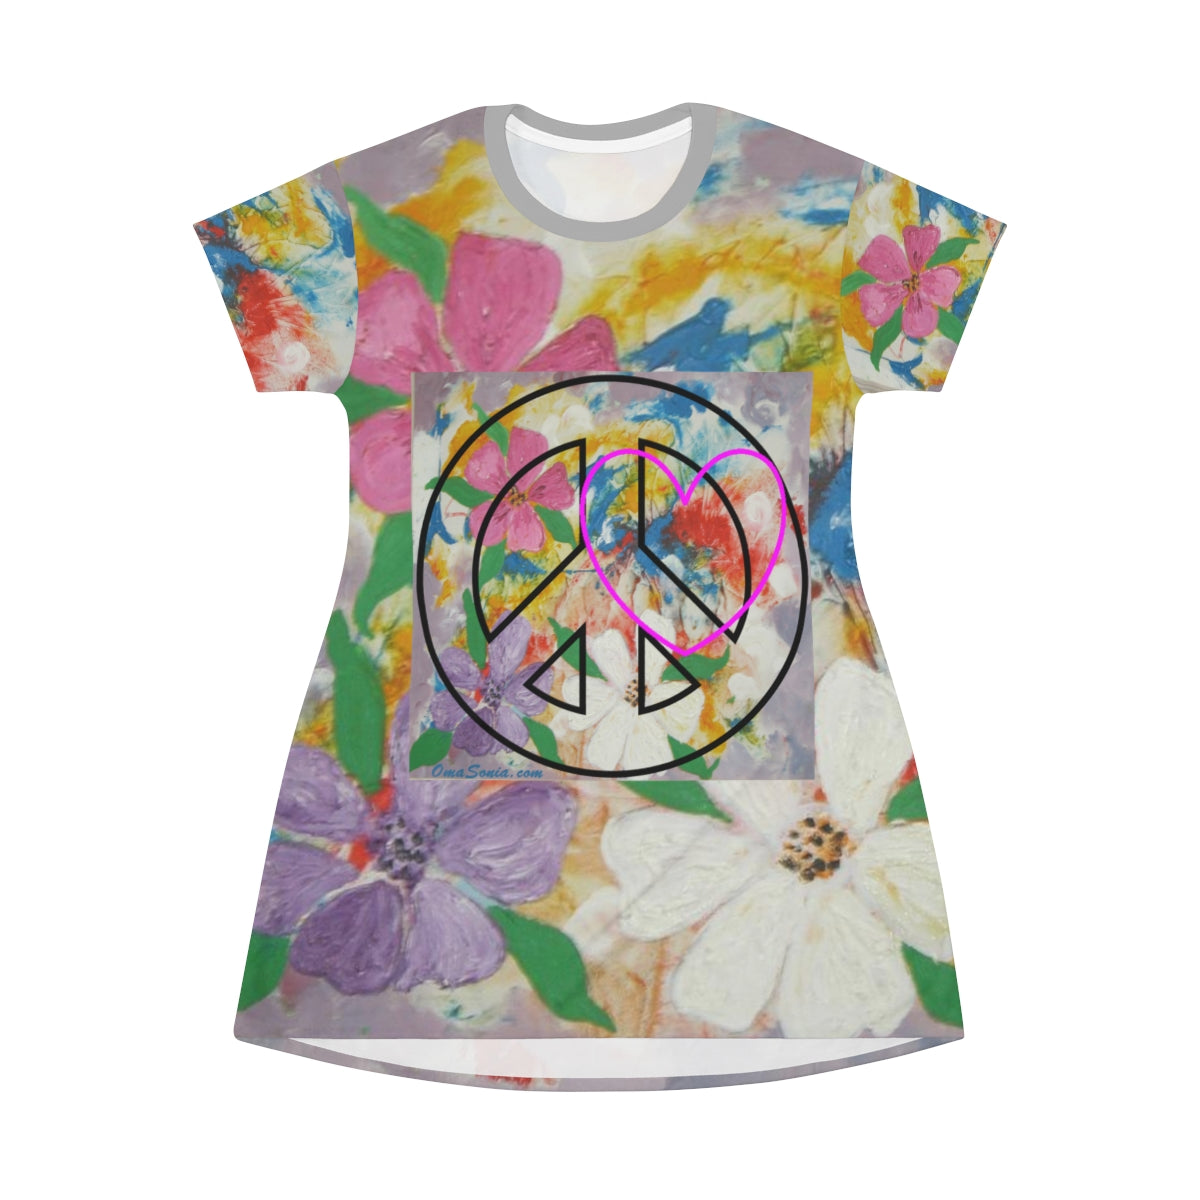 Oma Sonia's Peace-Love Floral T-Shirt Dress